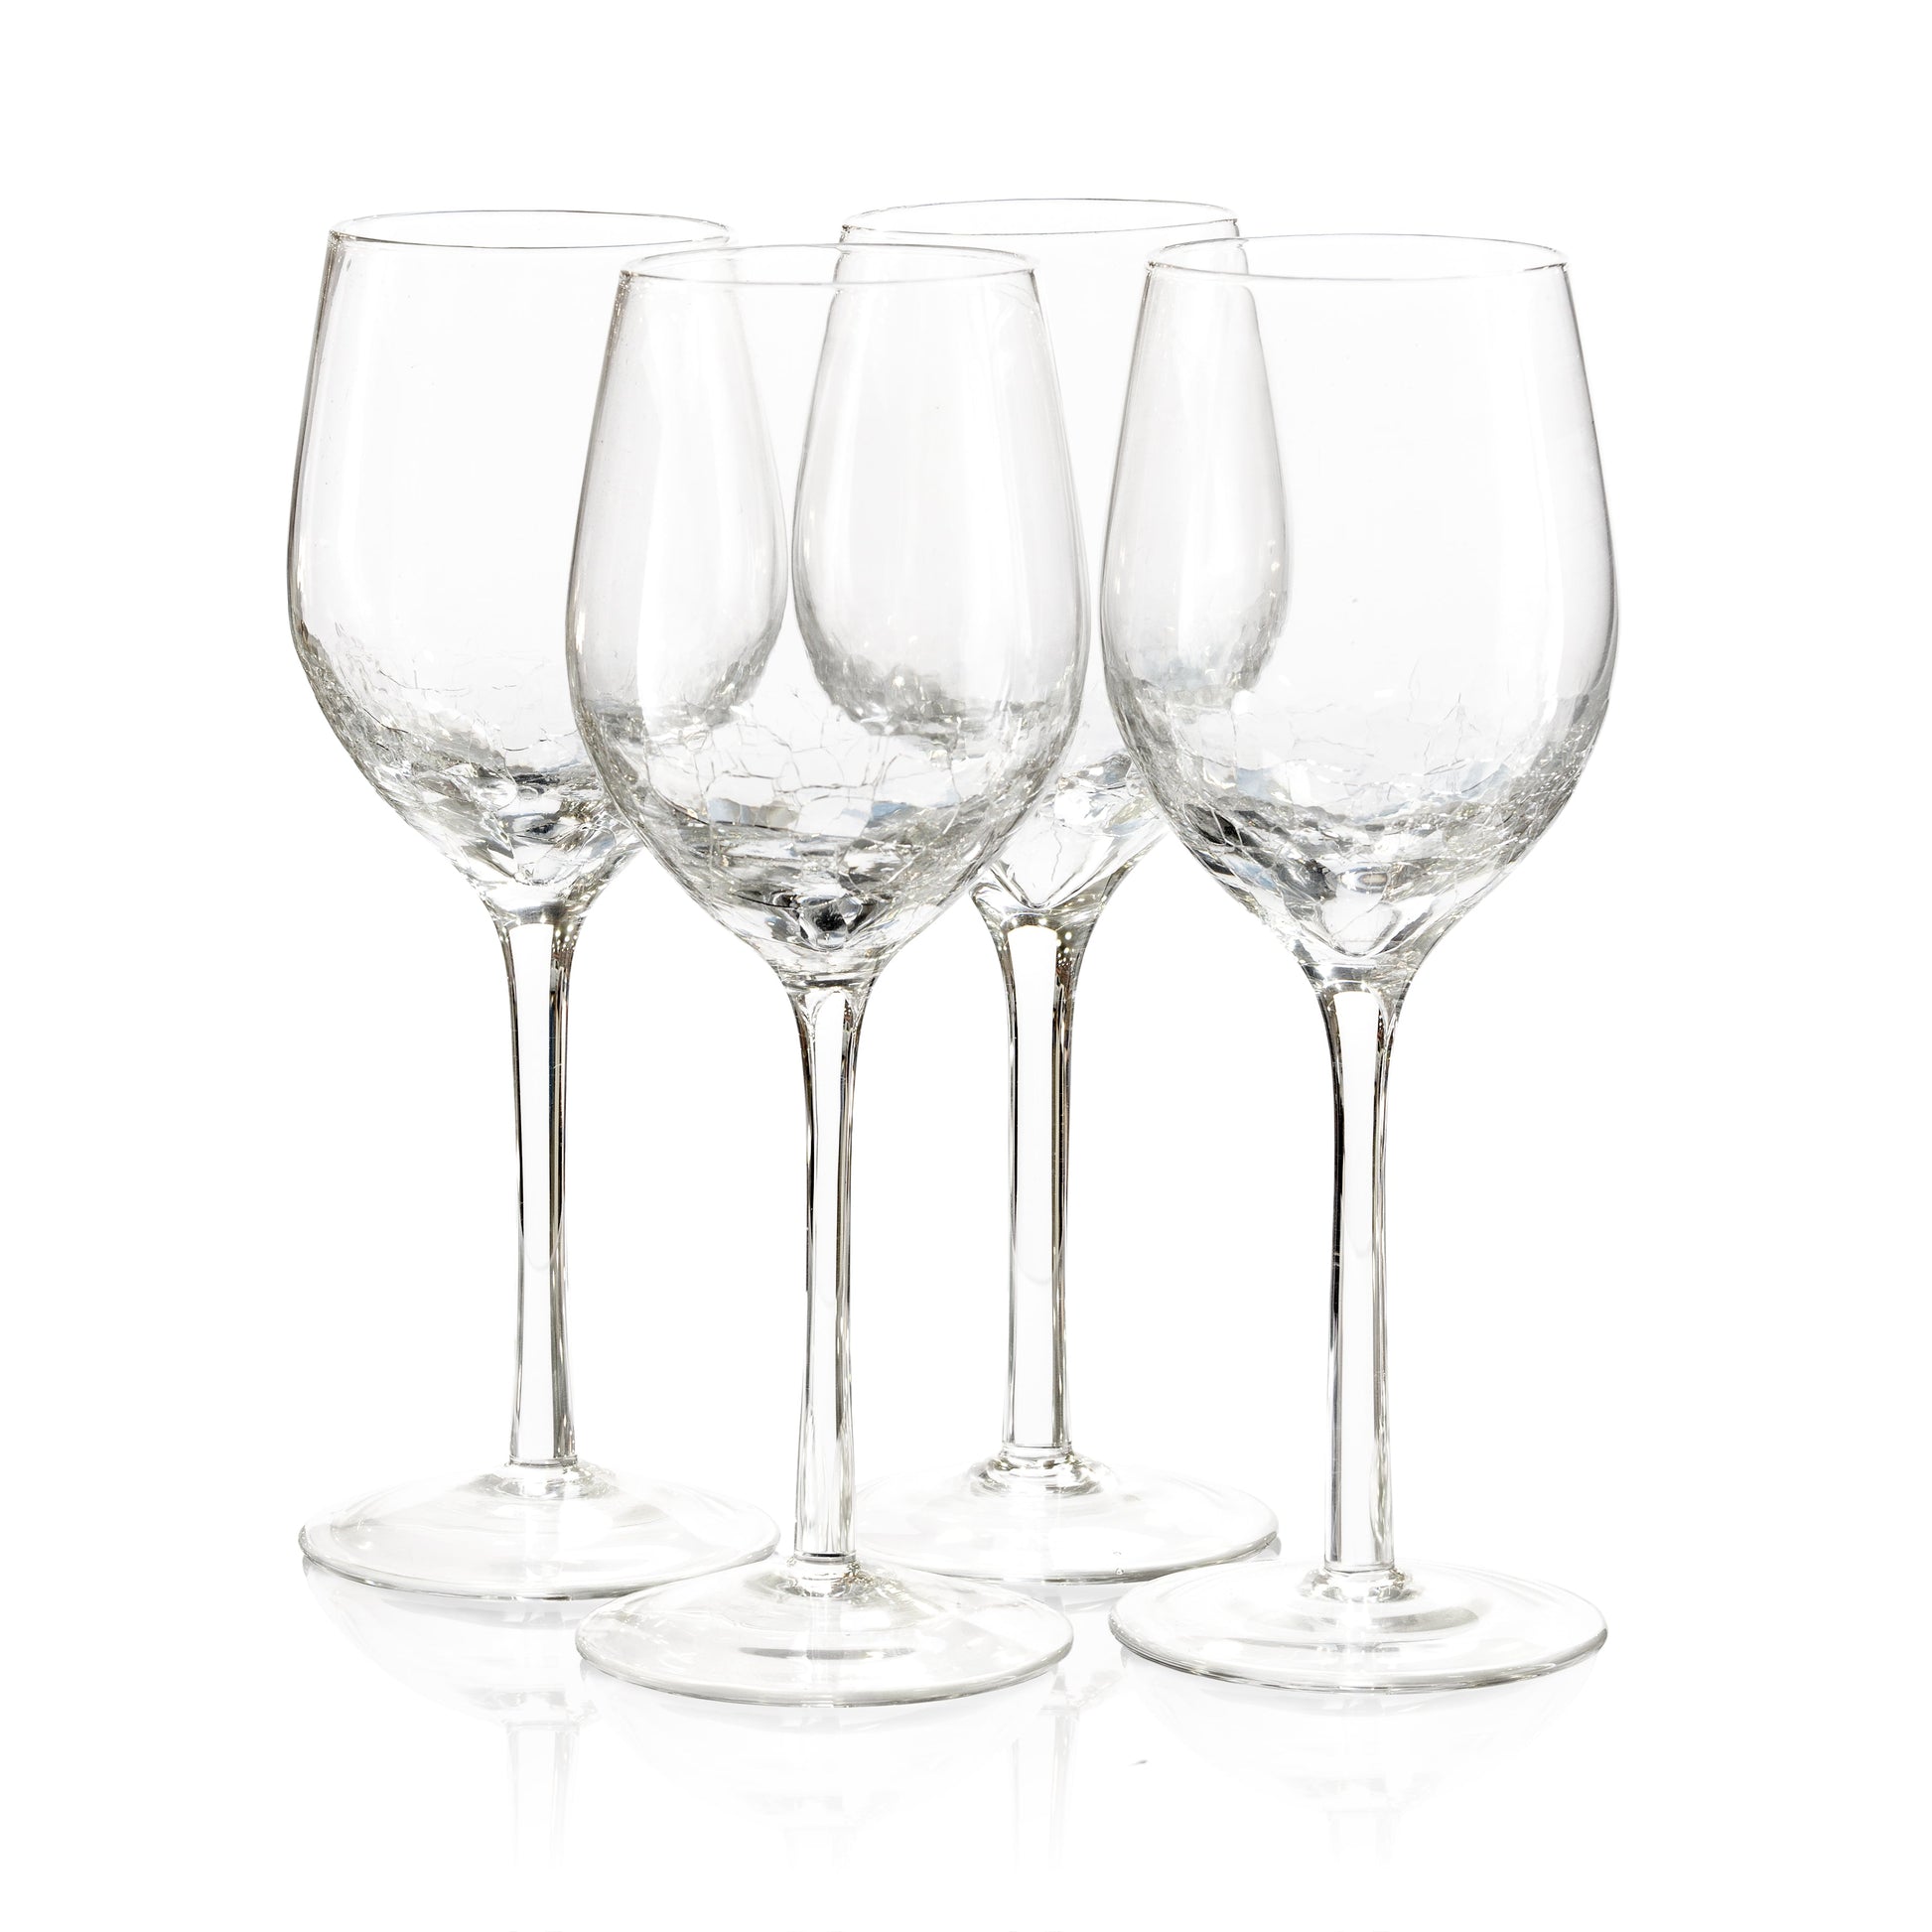 2 Pier One Crackle Wine Glasses/ 